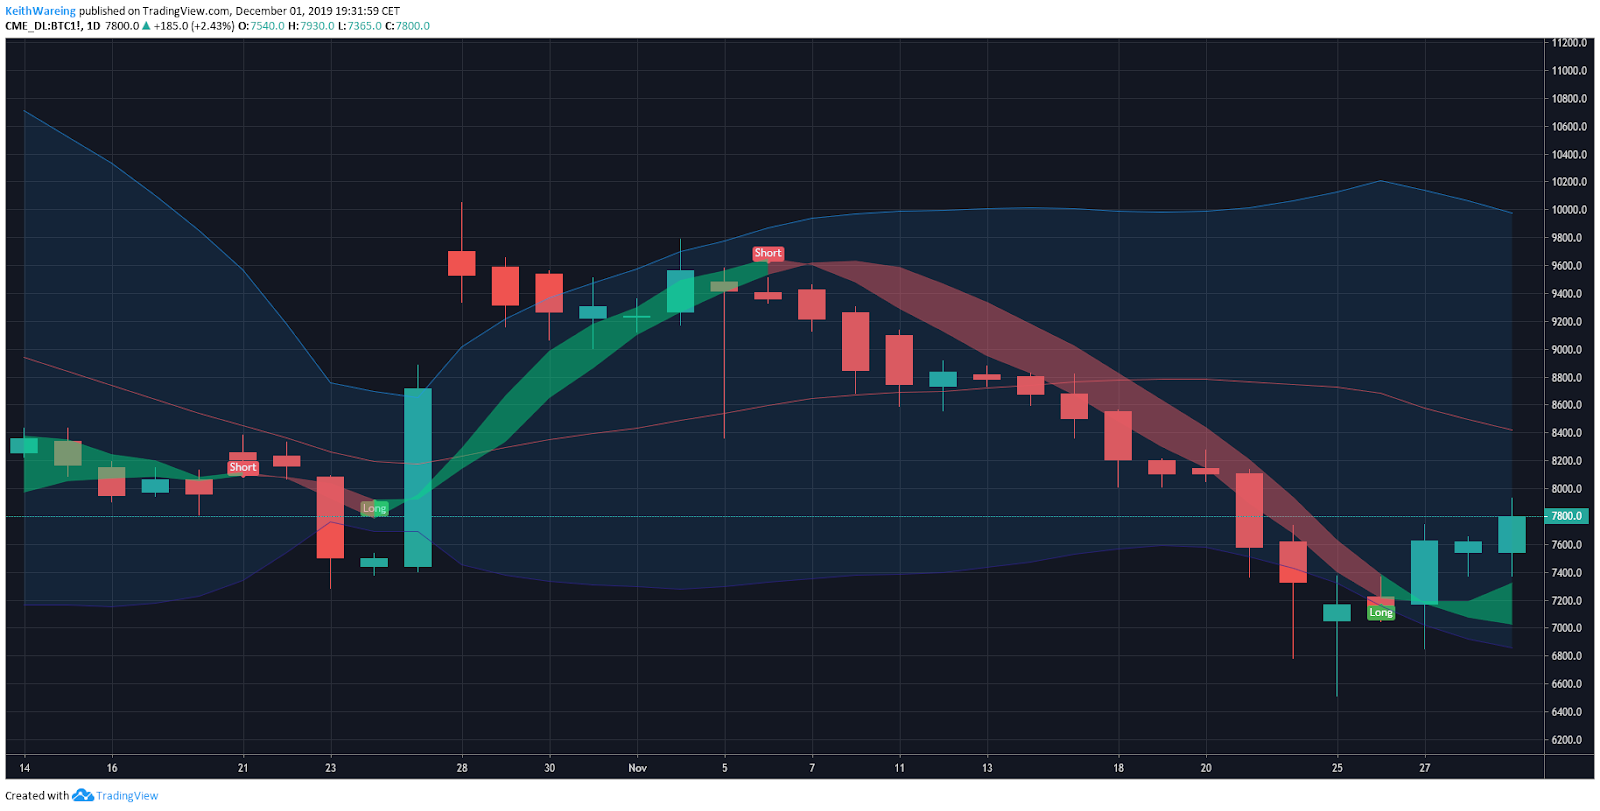 BITCOIN CME futures daily chart. Source: TradingView